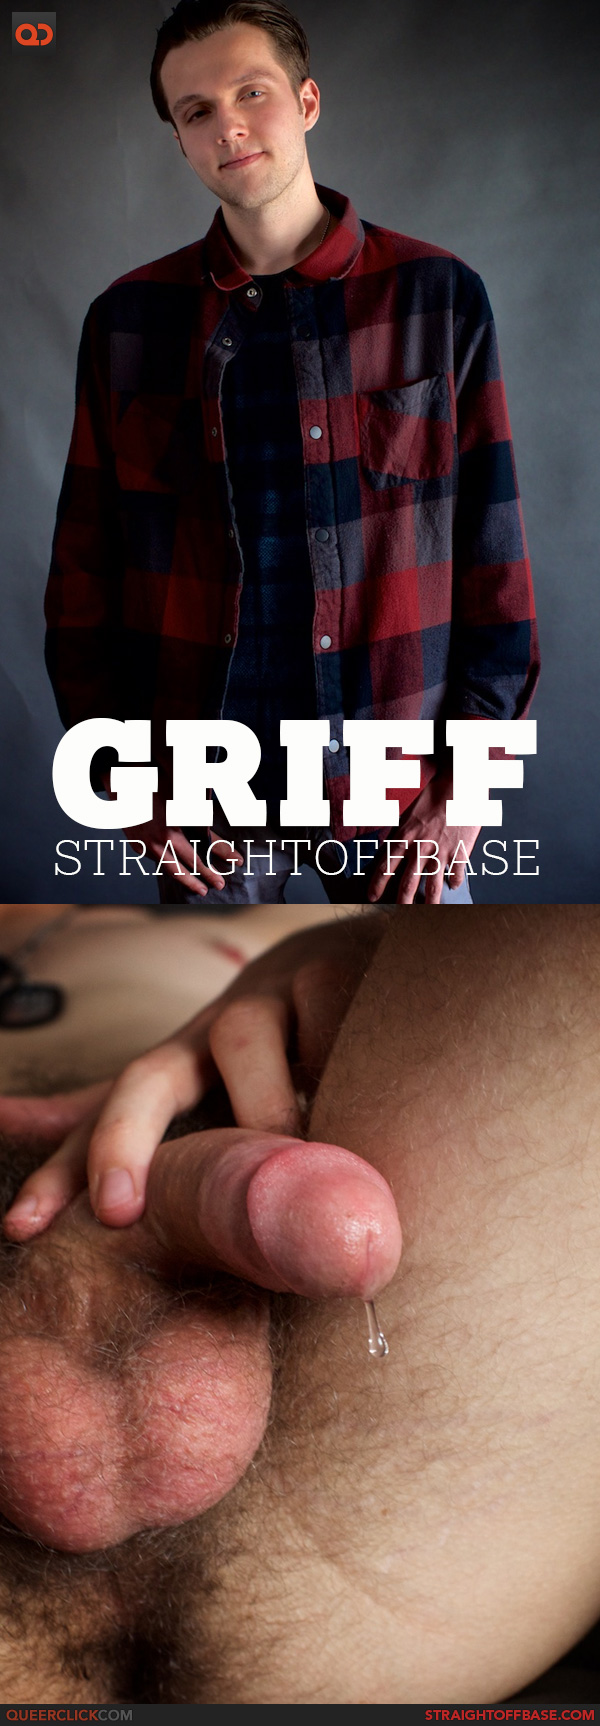 Straight Off Base: Griff